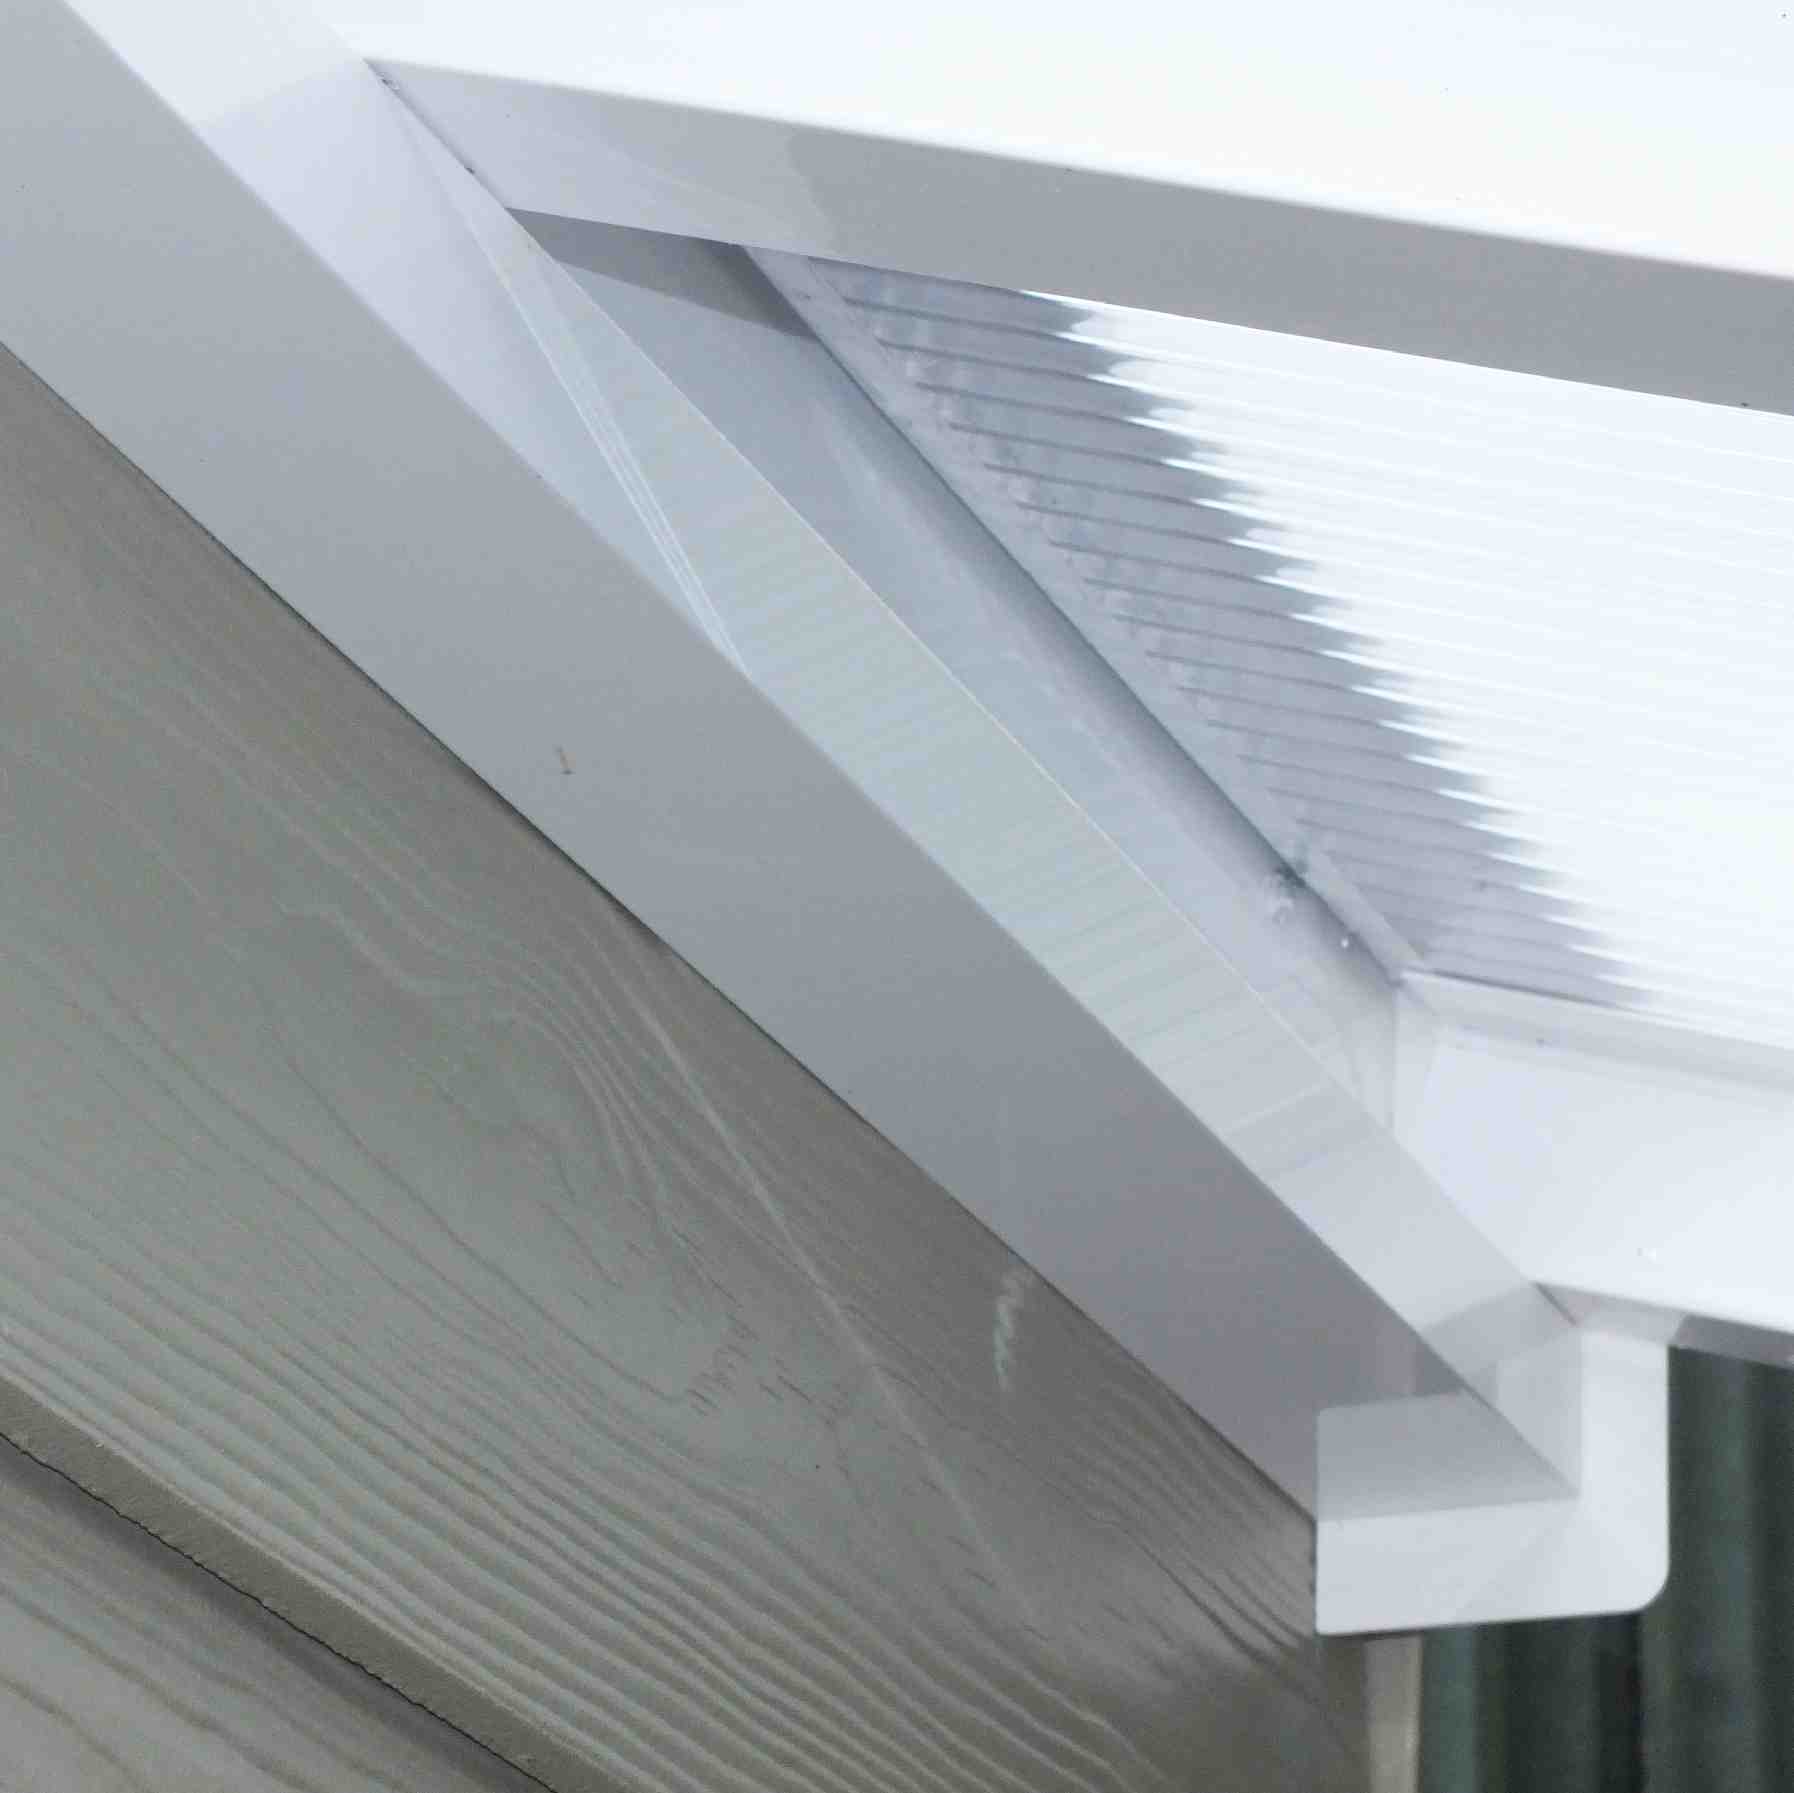 Great deals on Omega Verandah White with 16mm Polycarbonate Glazing - 11.4m (W) x 3.5m (P), (5) Supporting Posts